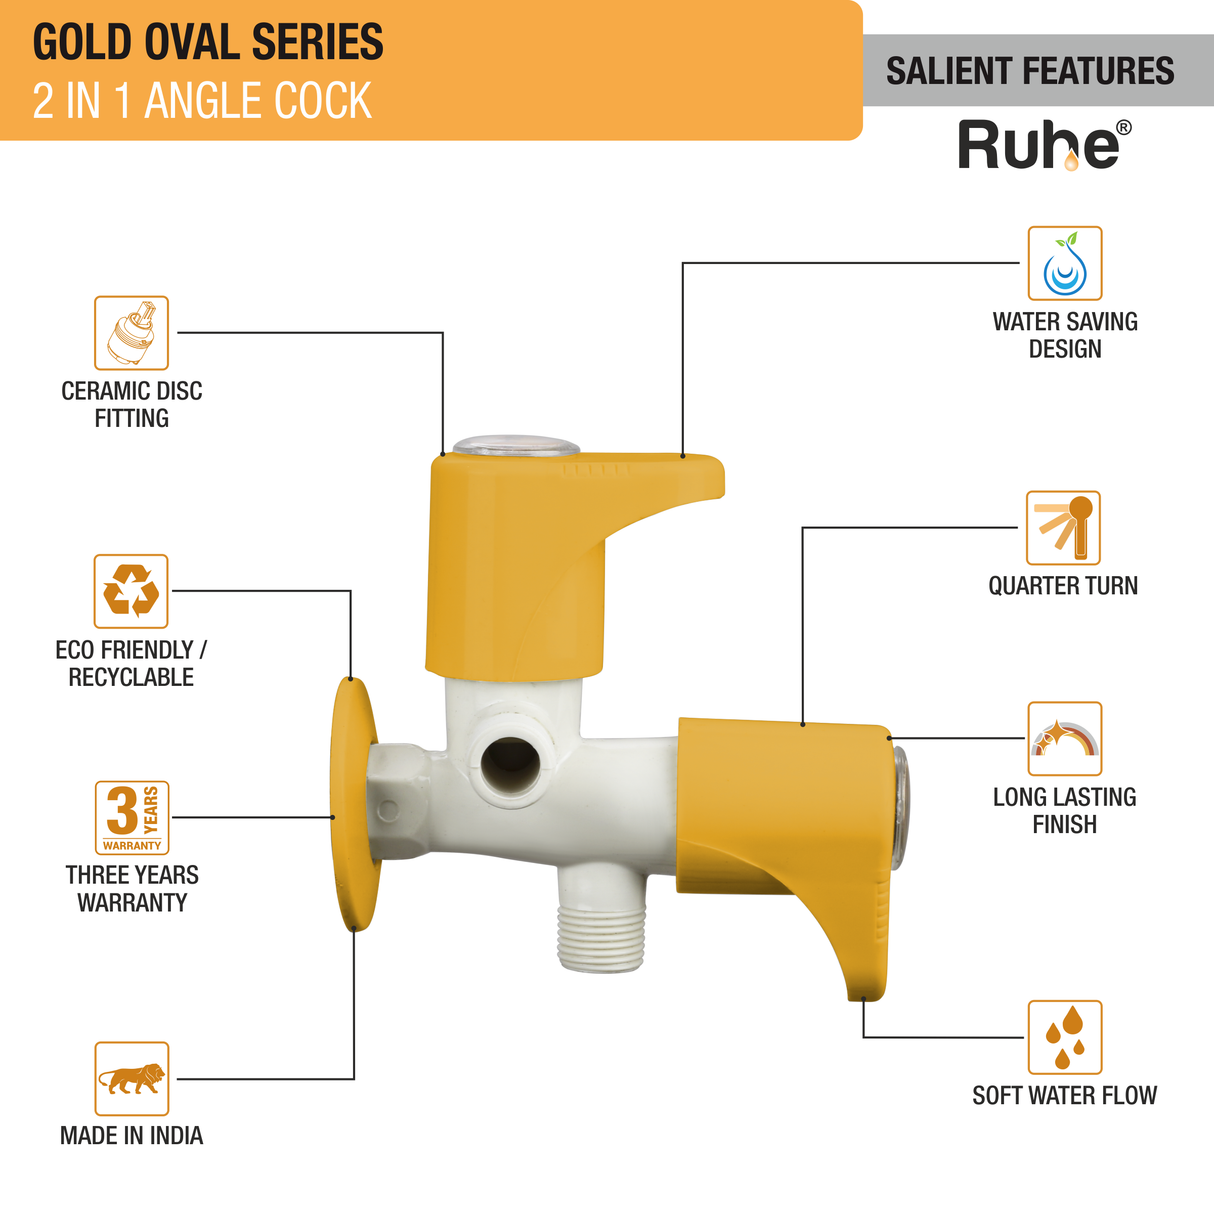 Gold Oval PTMT 2 in 1 Angle Cock Faucet features